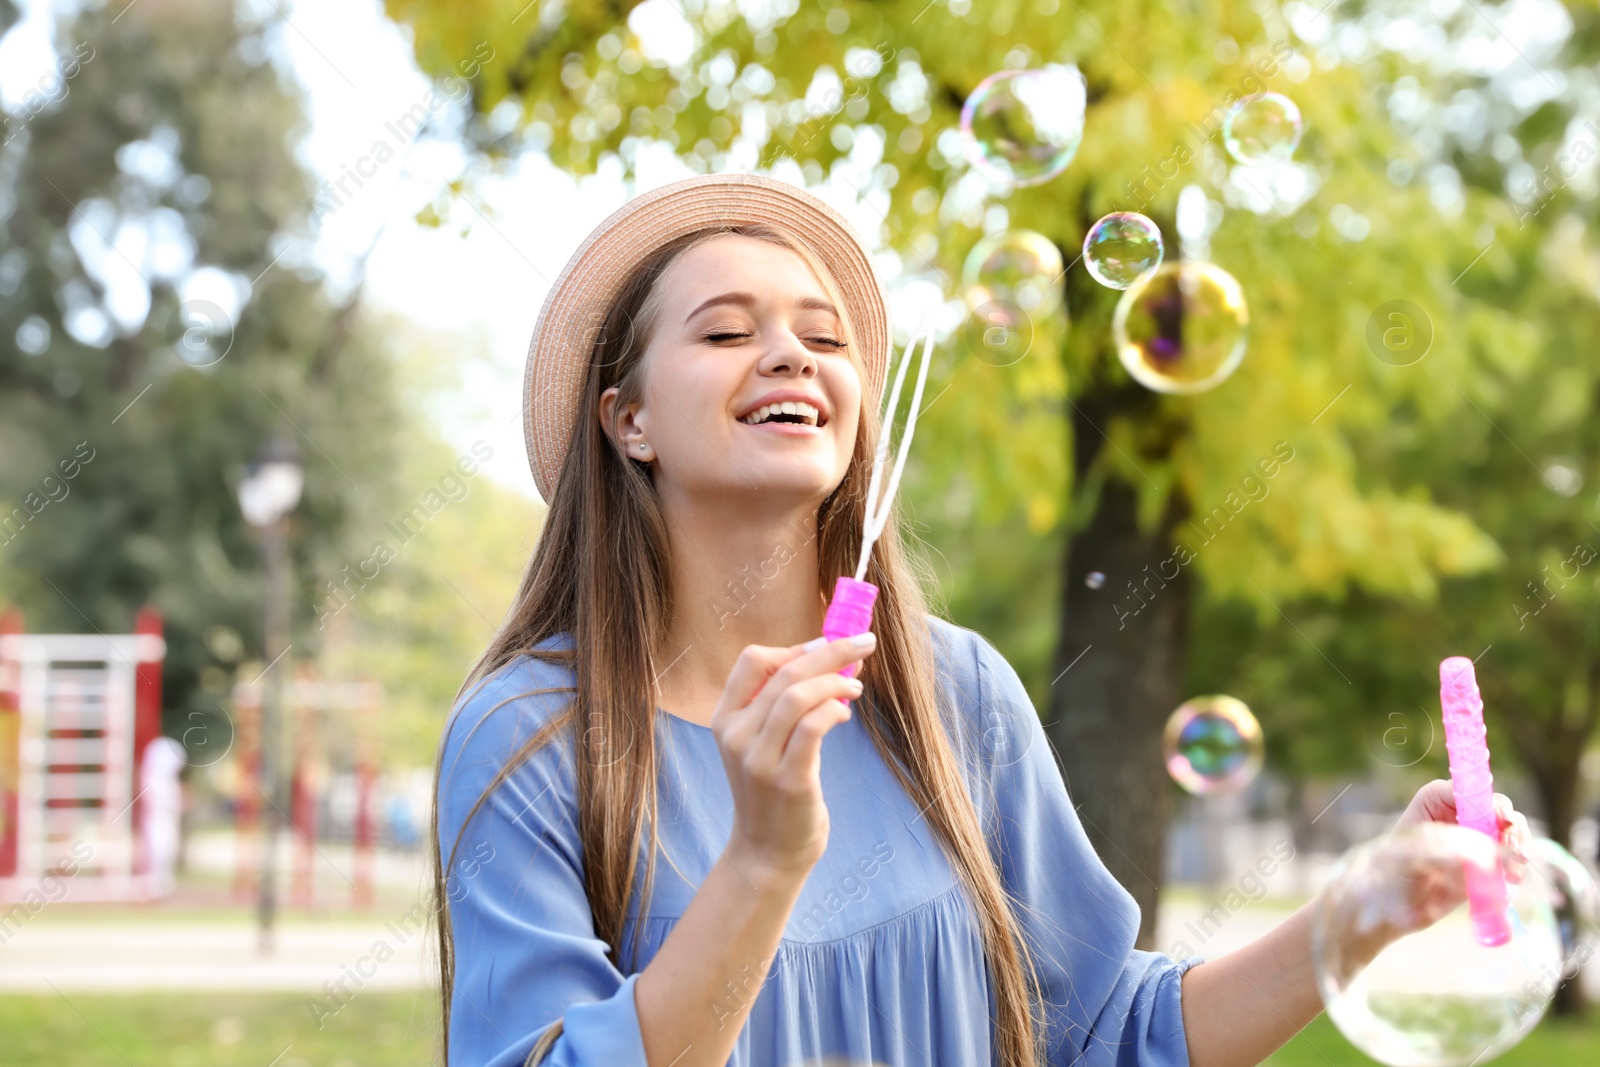 Photo of Young woman blowing soap bubbles in park